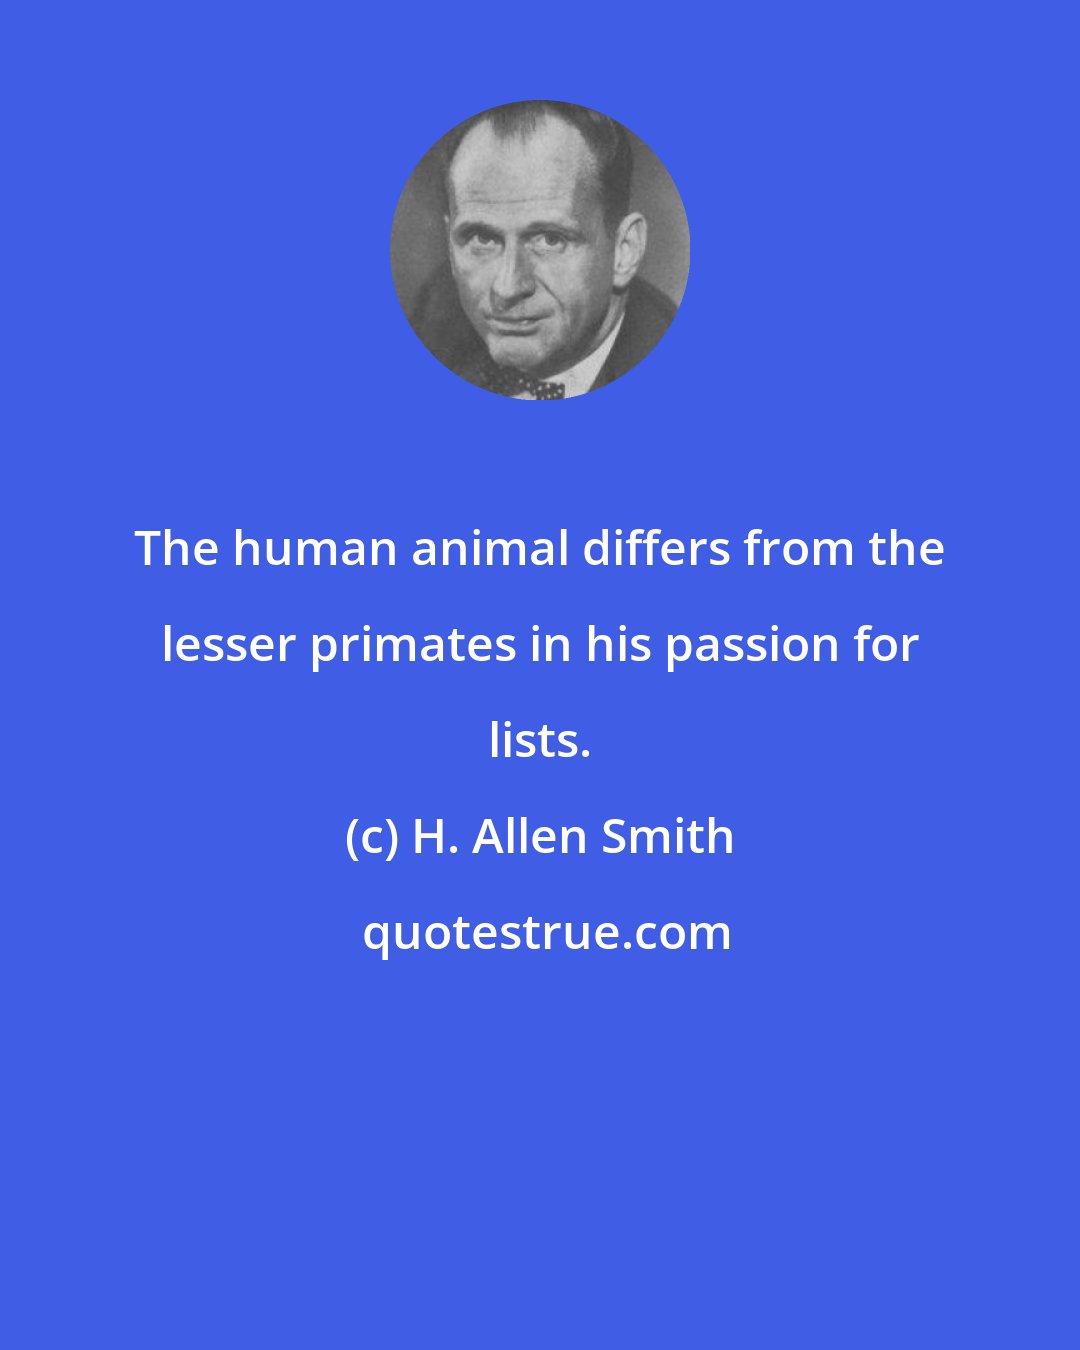 H. Allen Smith: The human animal differs from the lesser primates in his passion for lists.